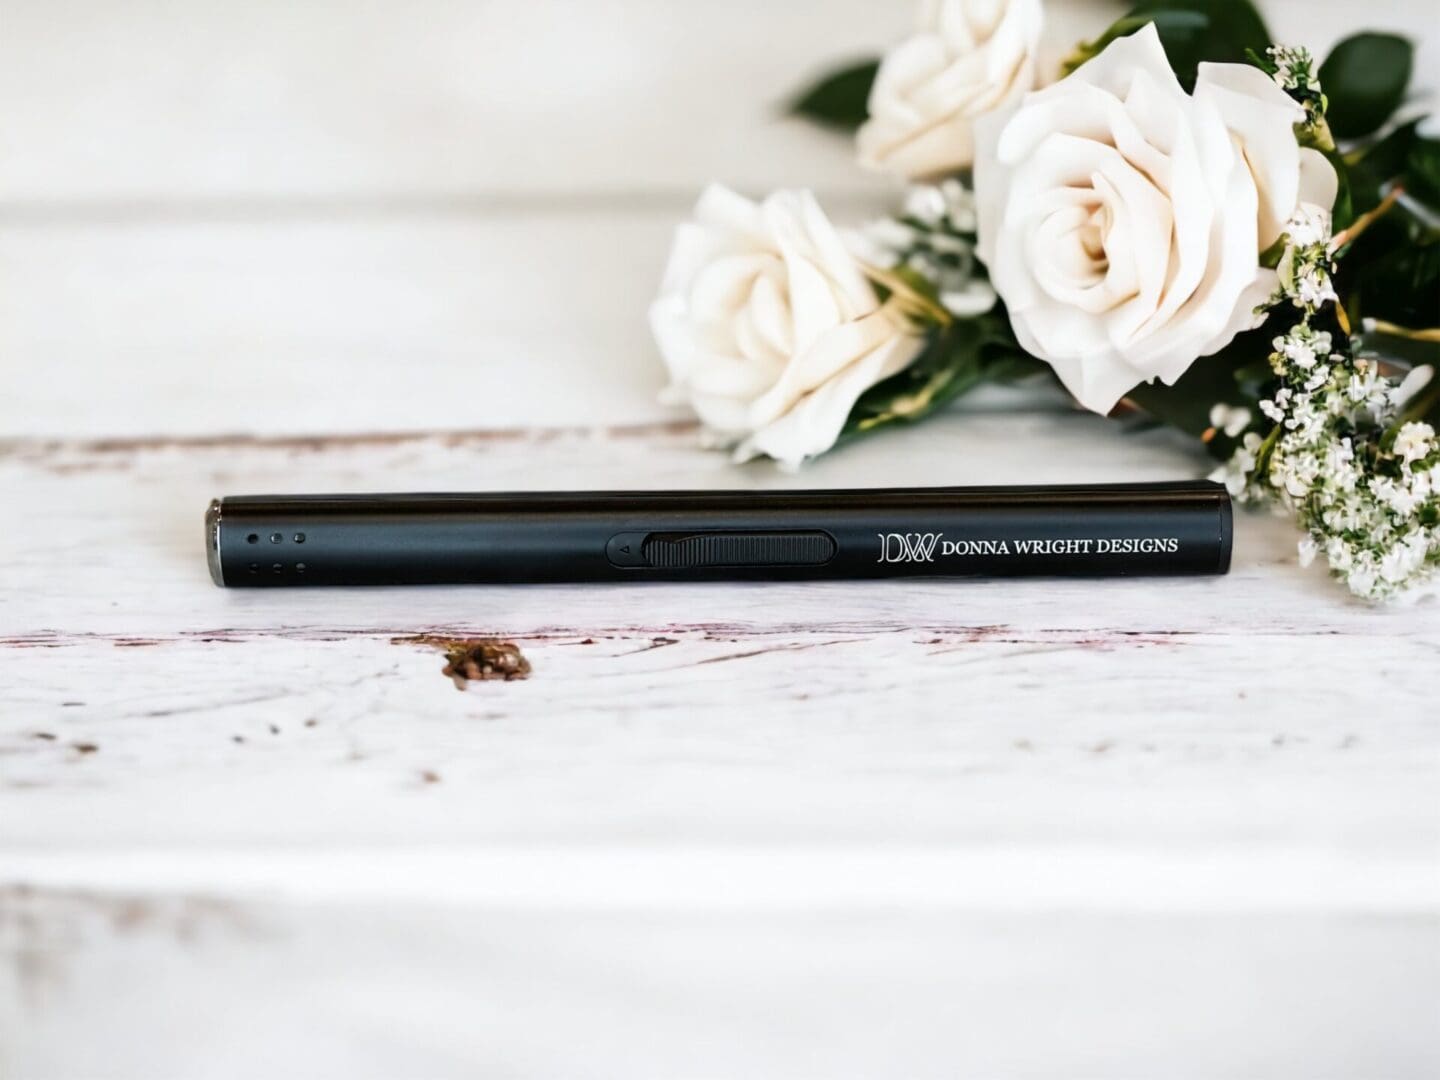 Donna Wright Designs A black stylus pen labeled "donna wright designs" lies on a white wooden surface next to a bouquet of white roses and a Candle Lighter - Refillable Butane.